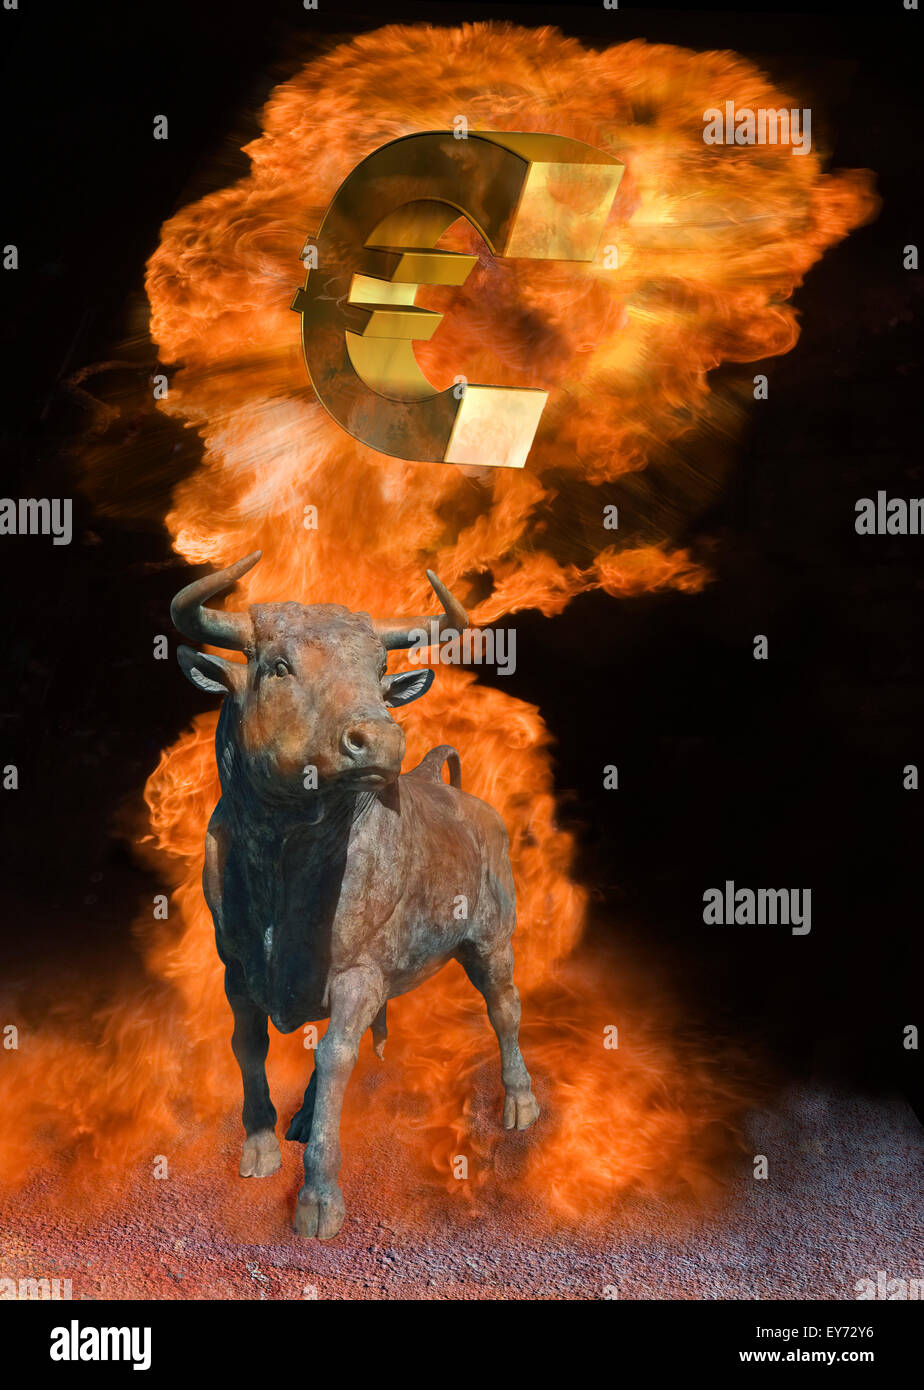 Bull with euro sign in firestorm, symbolic image for bull market Stock Photo